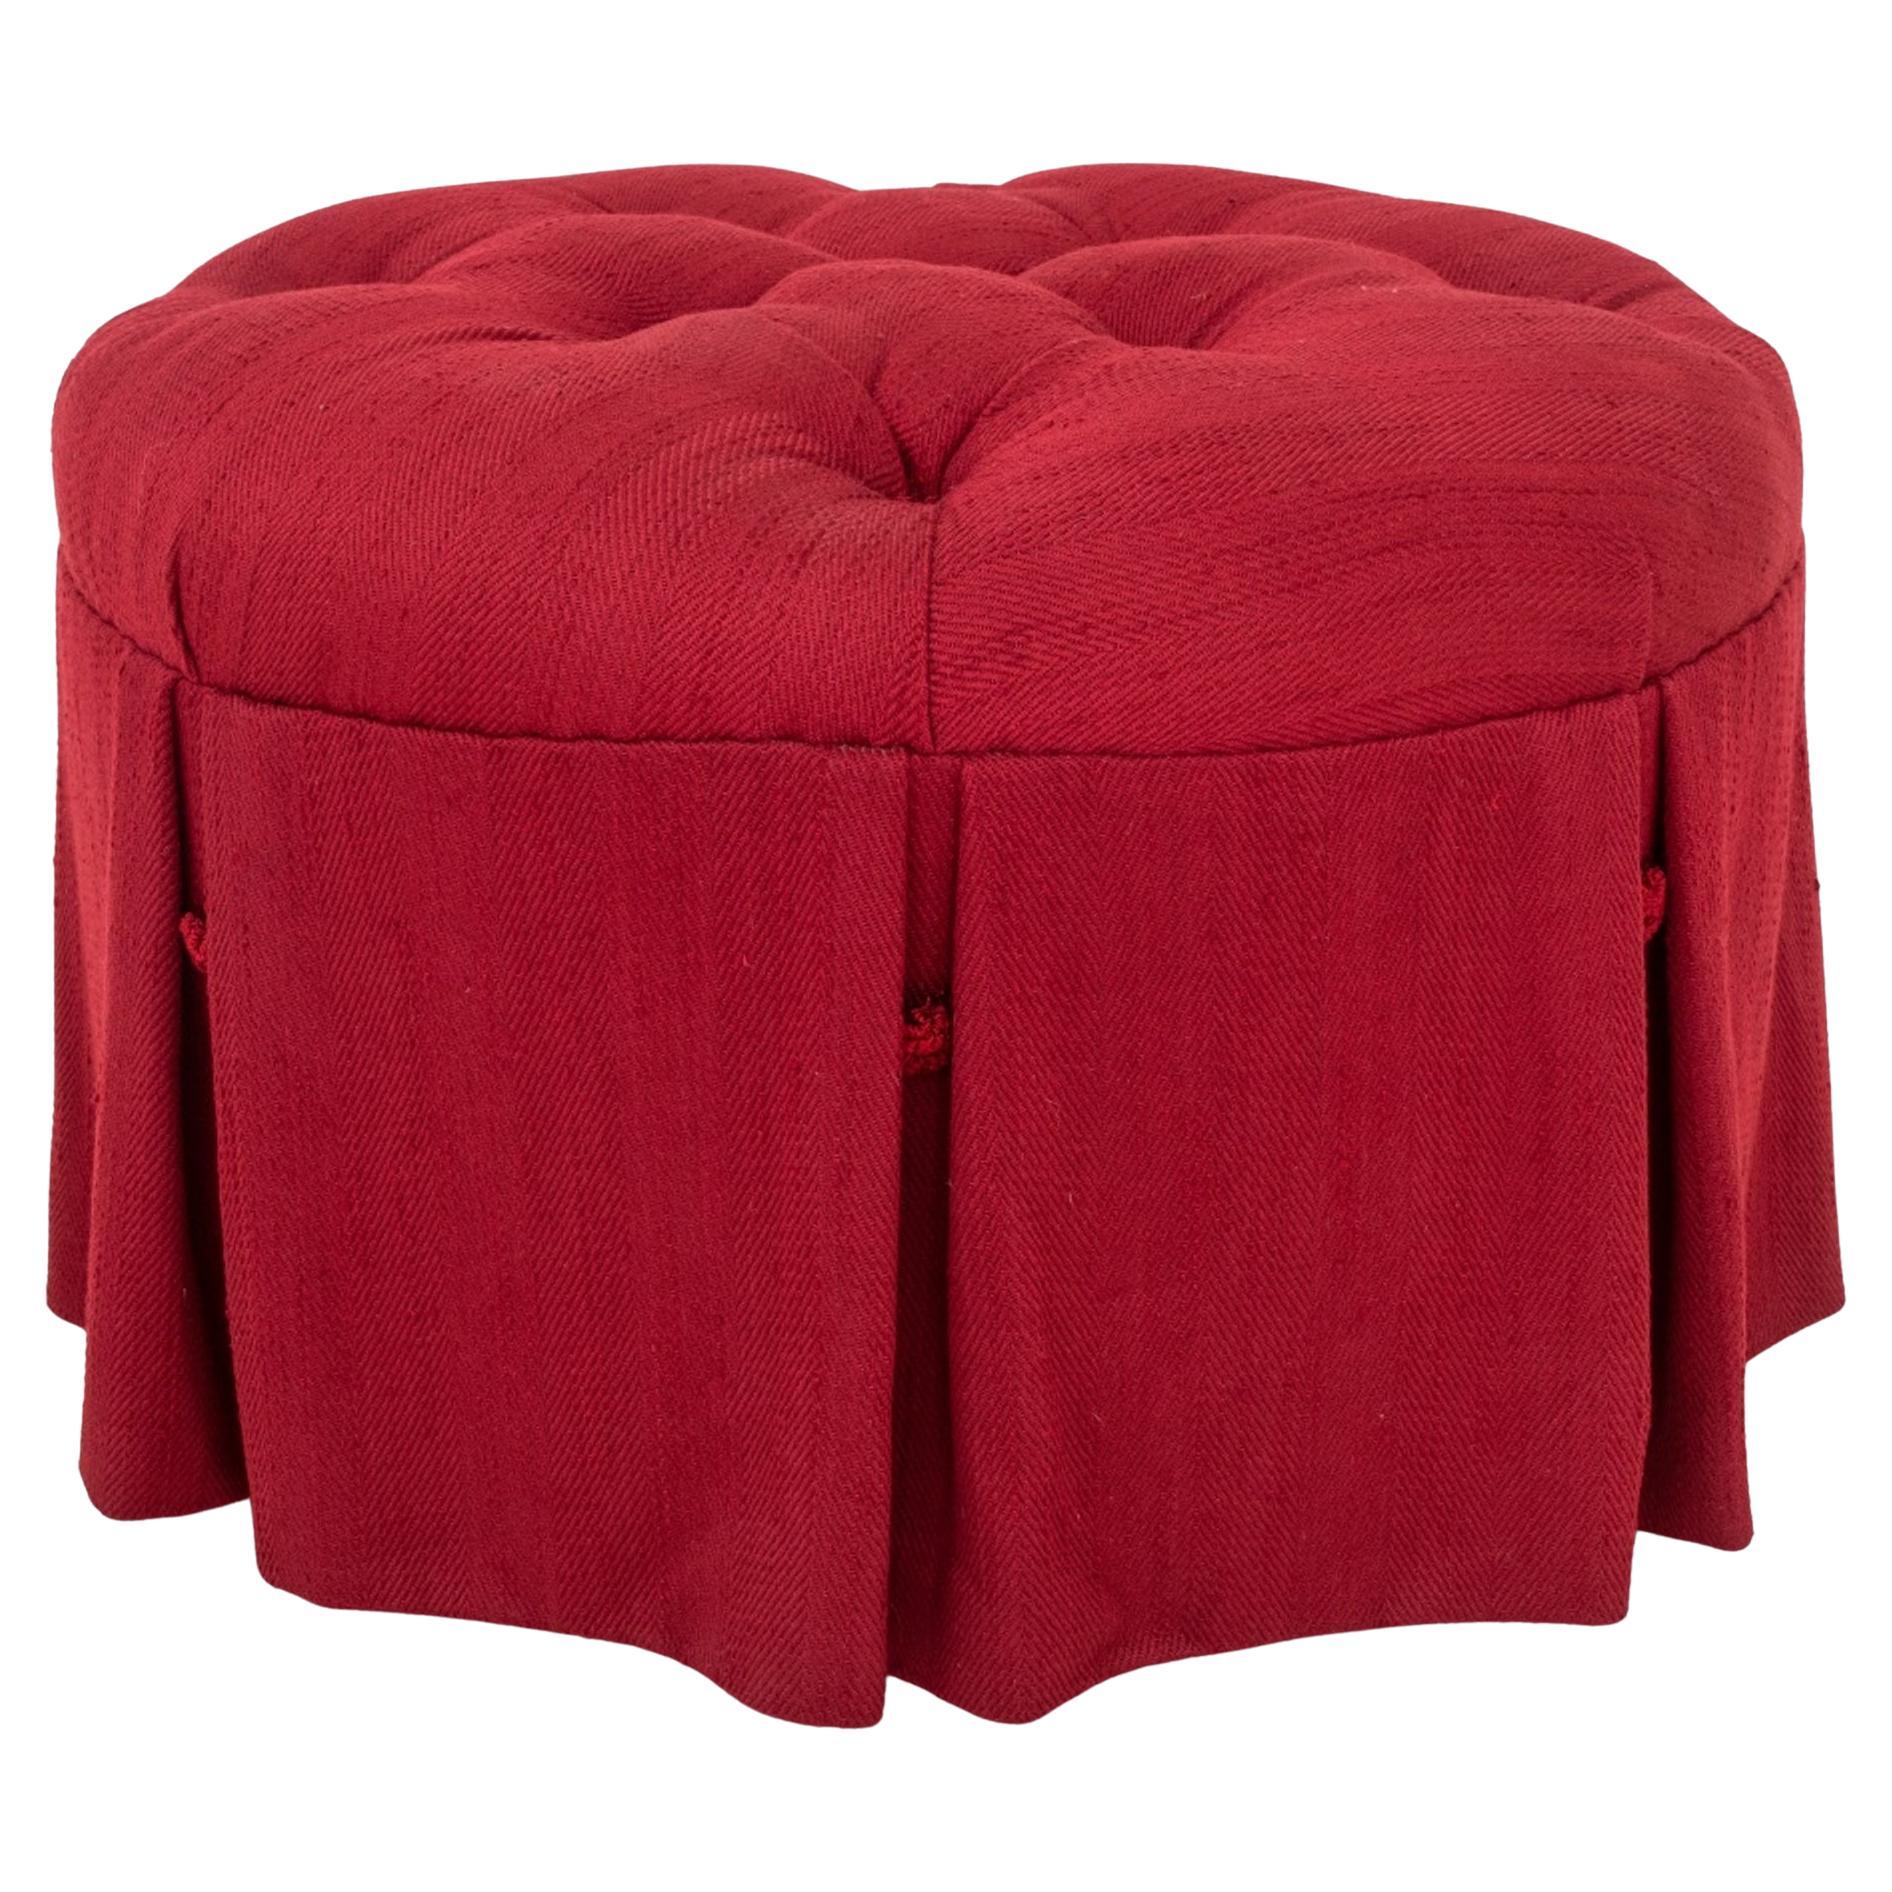 Upholstered 'Pouf' or Ottoman